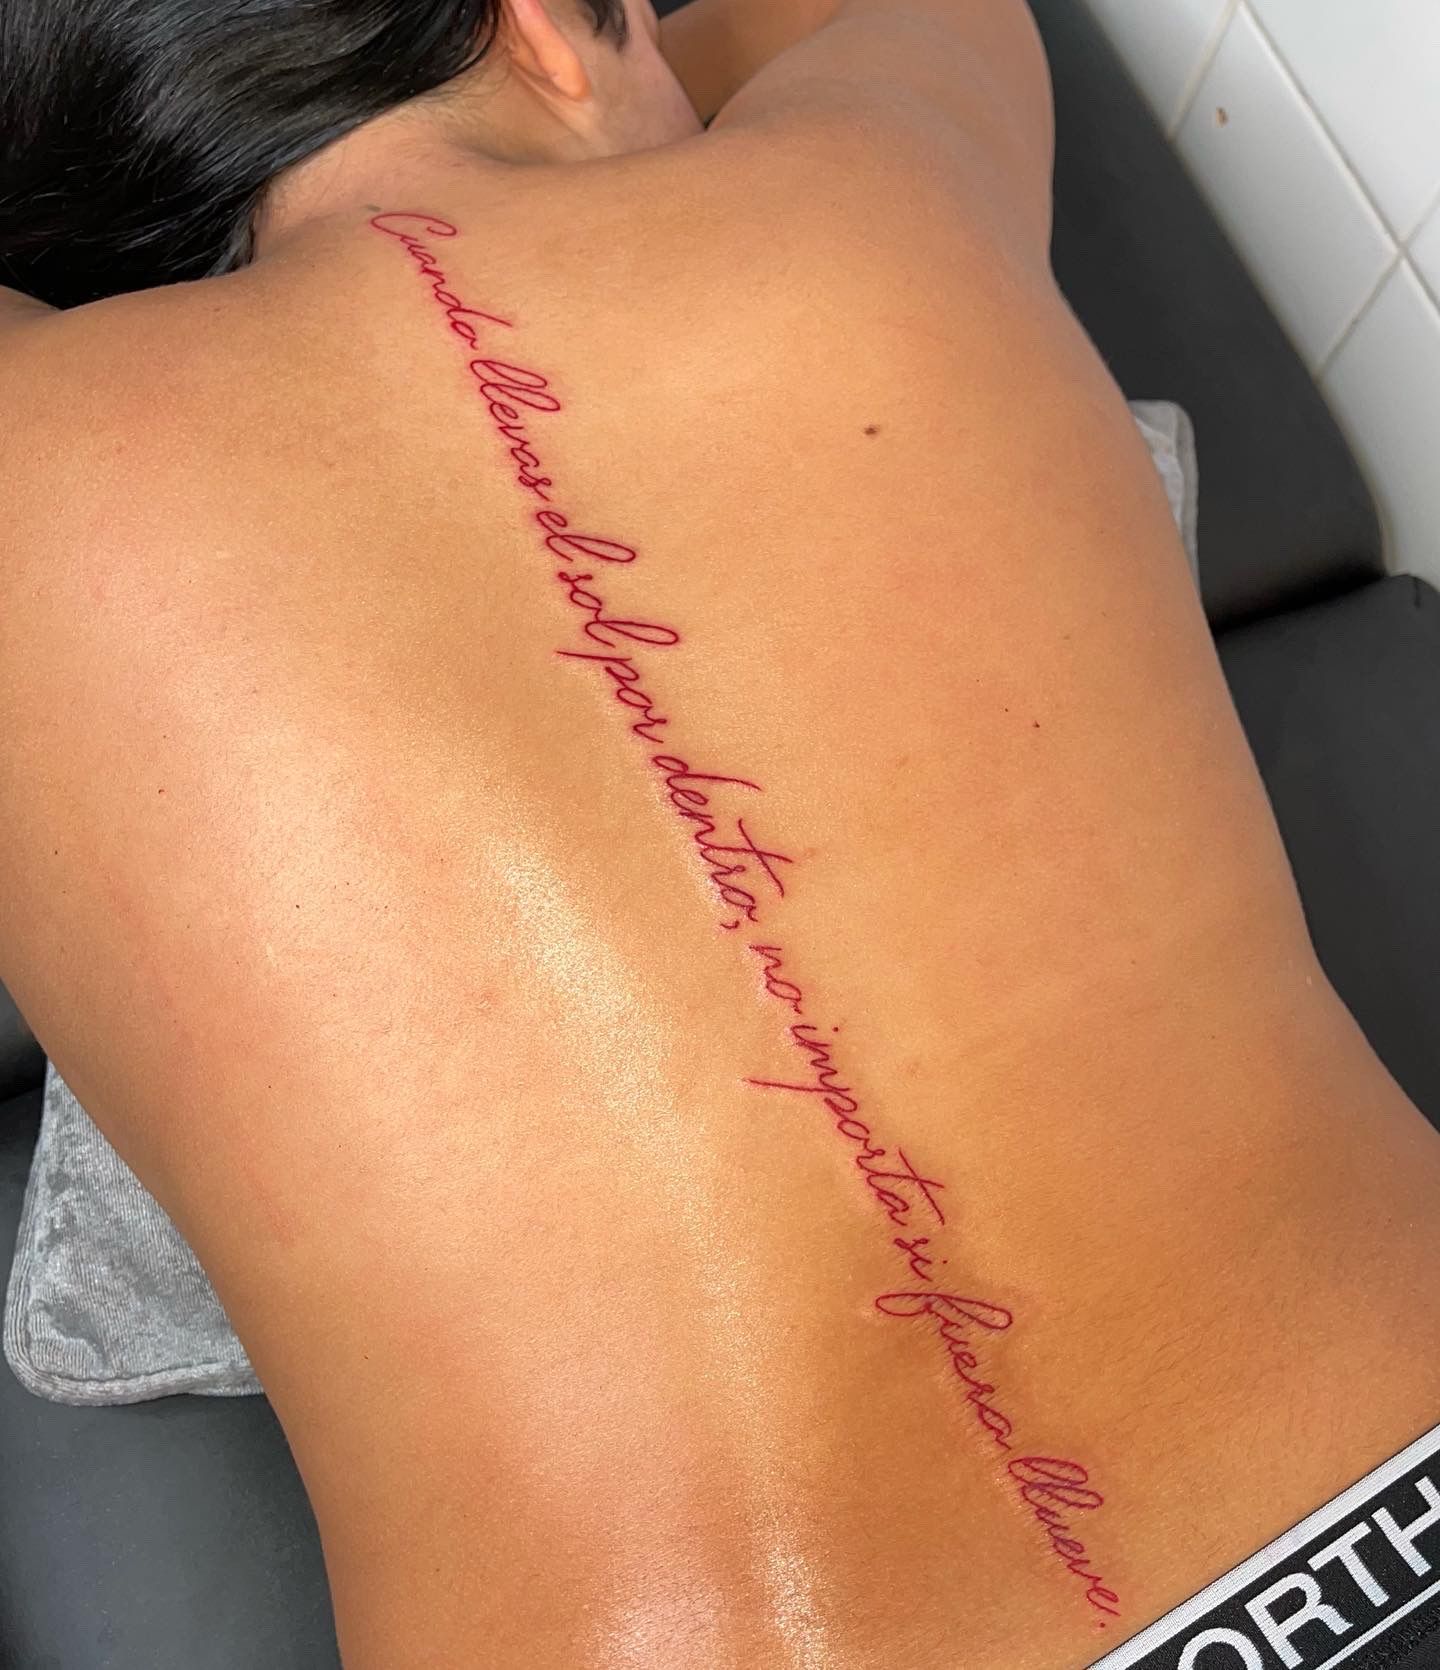 she is the sunlight  Honestly will never get sick of spine pieces       utahtattooartist spinetattoo scripttattoo  Instagram